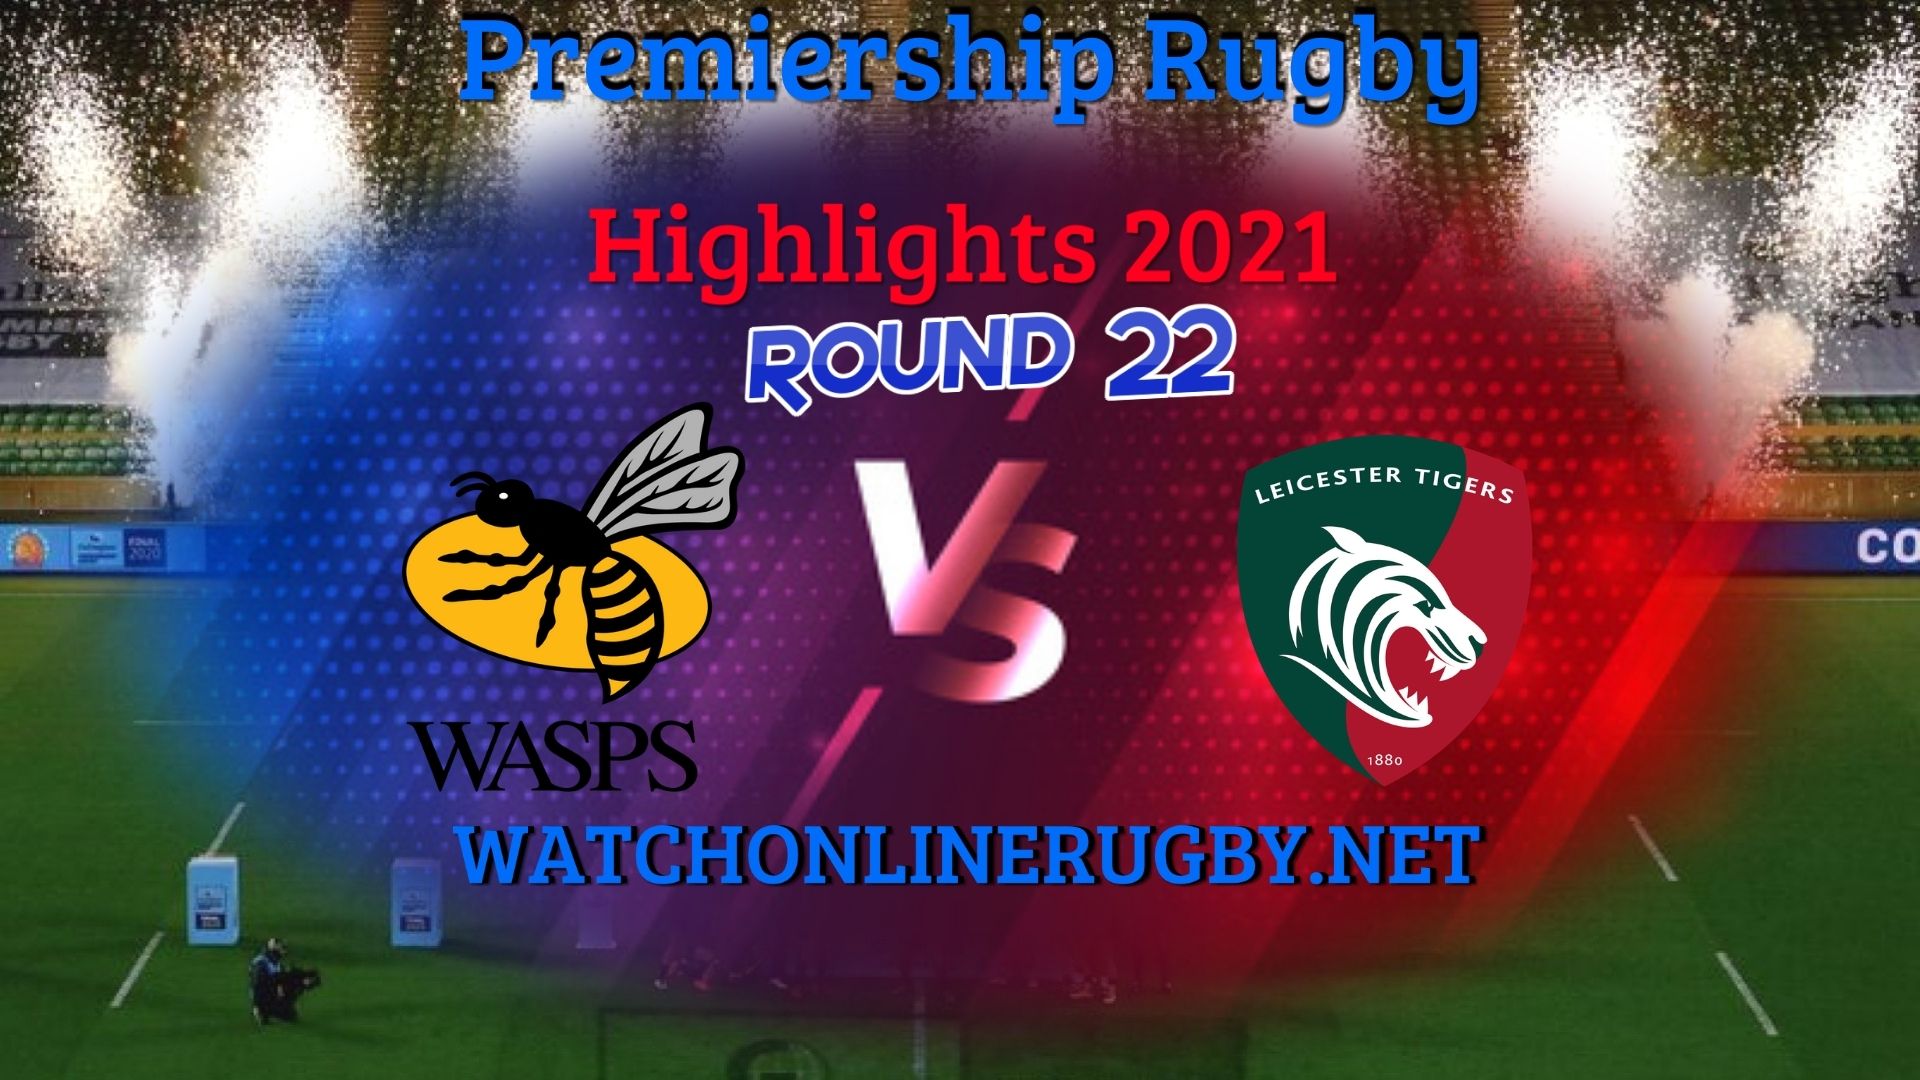 Wasps Vs Leicester Tigers Premiership Rugby 2021 RD 22